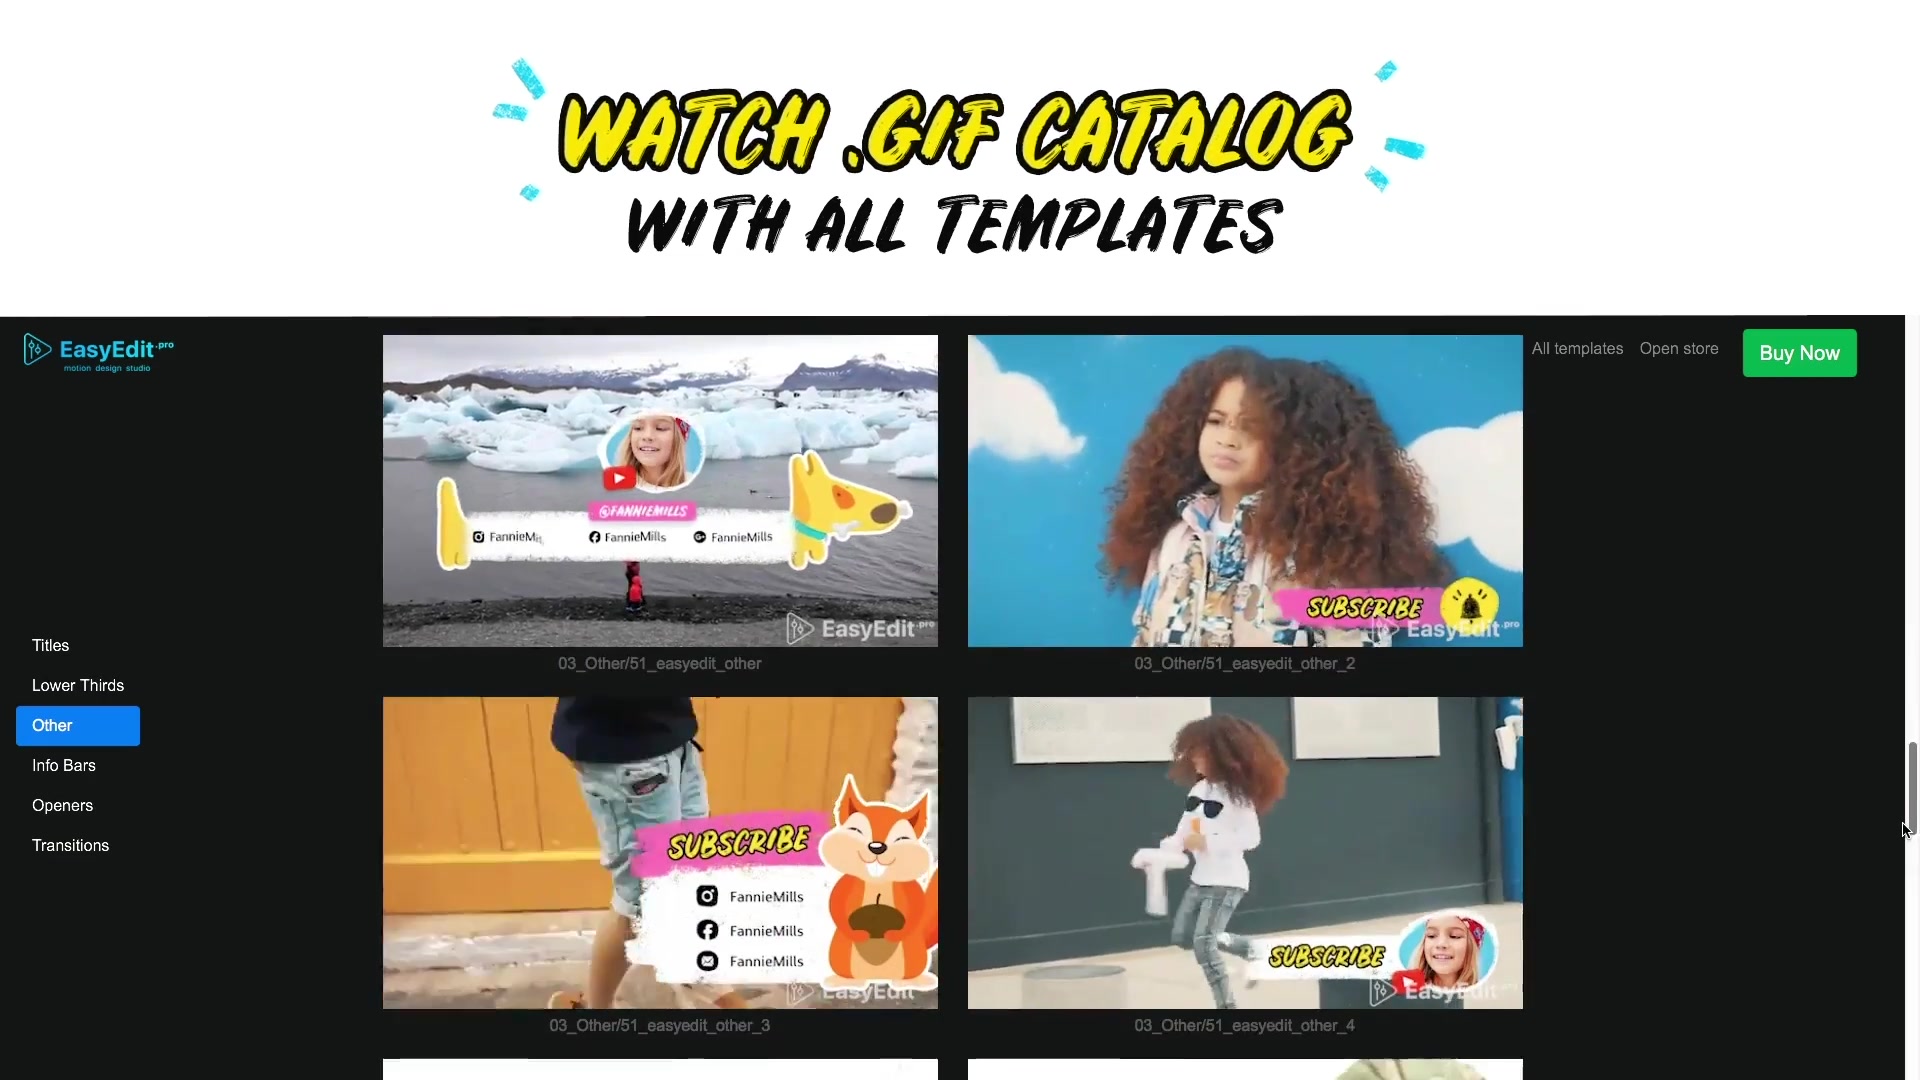 Kids Youtube Package | For Ae - Download Videohive 22298286